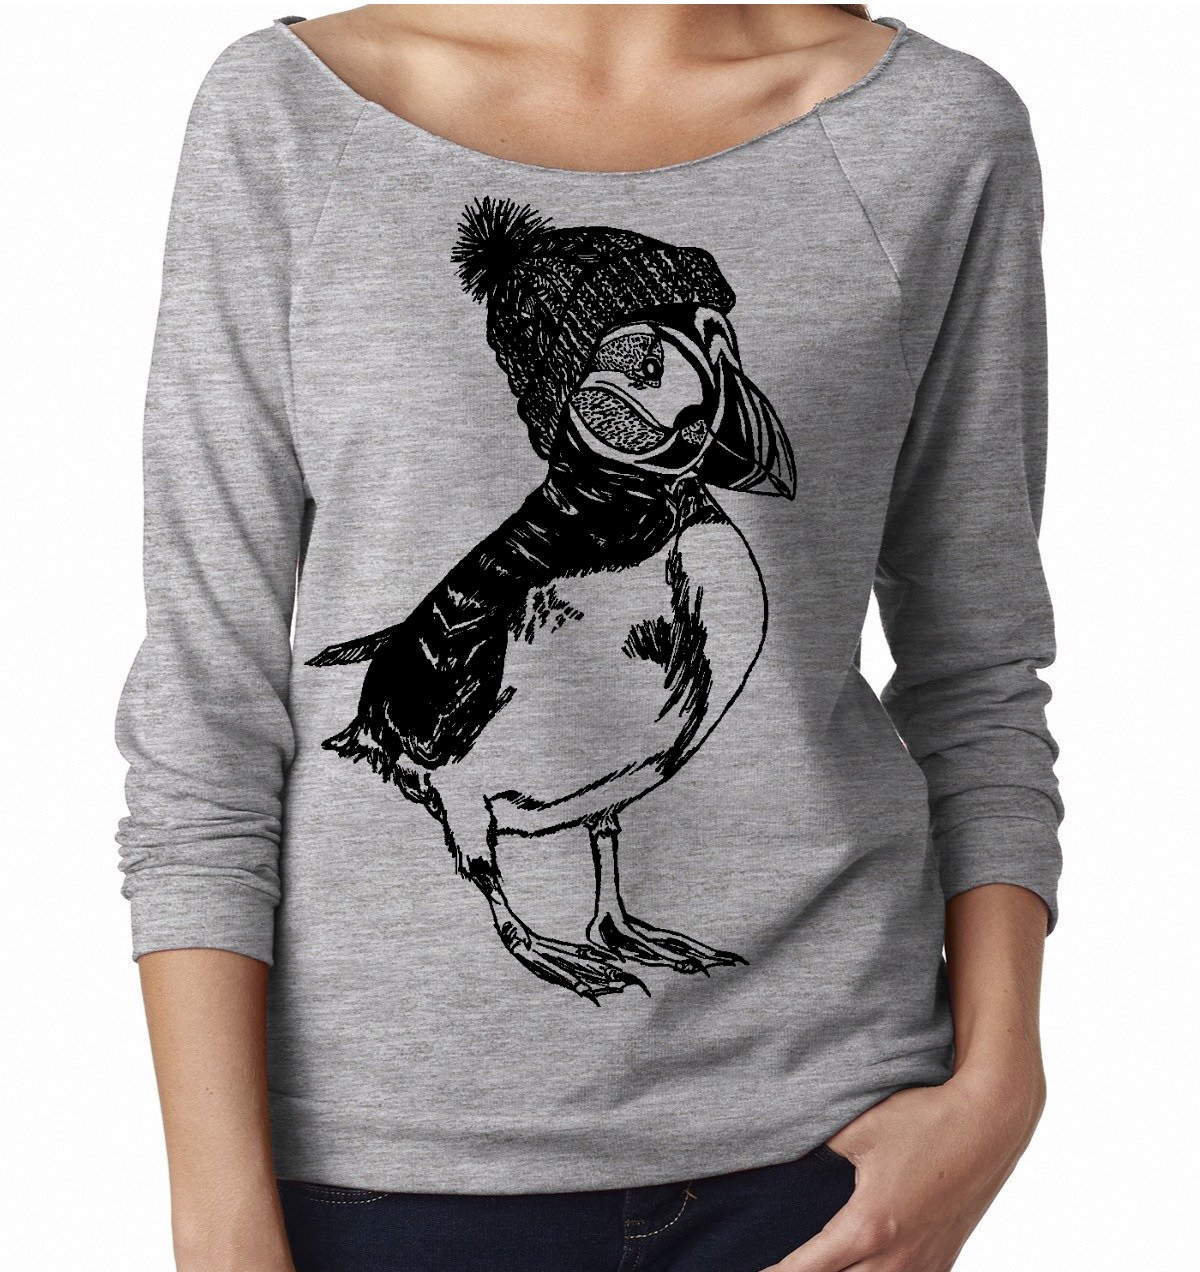 Puffin in a Pom Pom Hat Ladies 3/4 Sleeve Boatneck Shirt